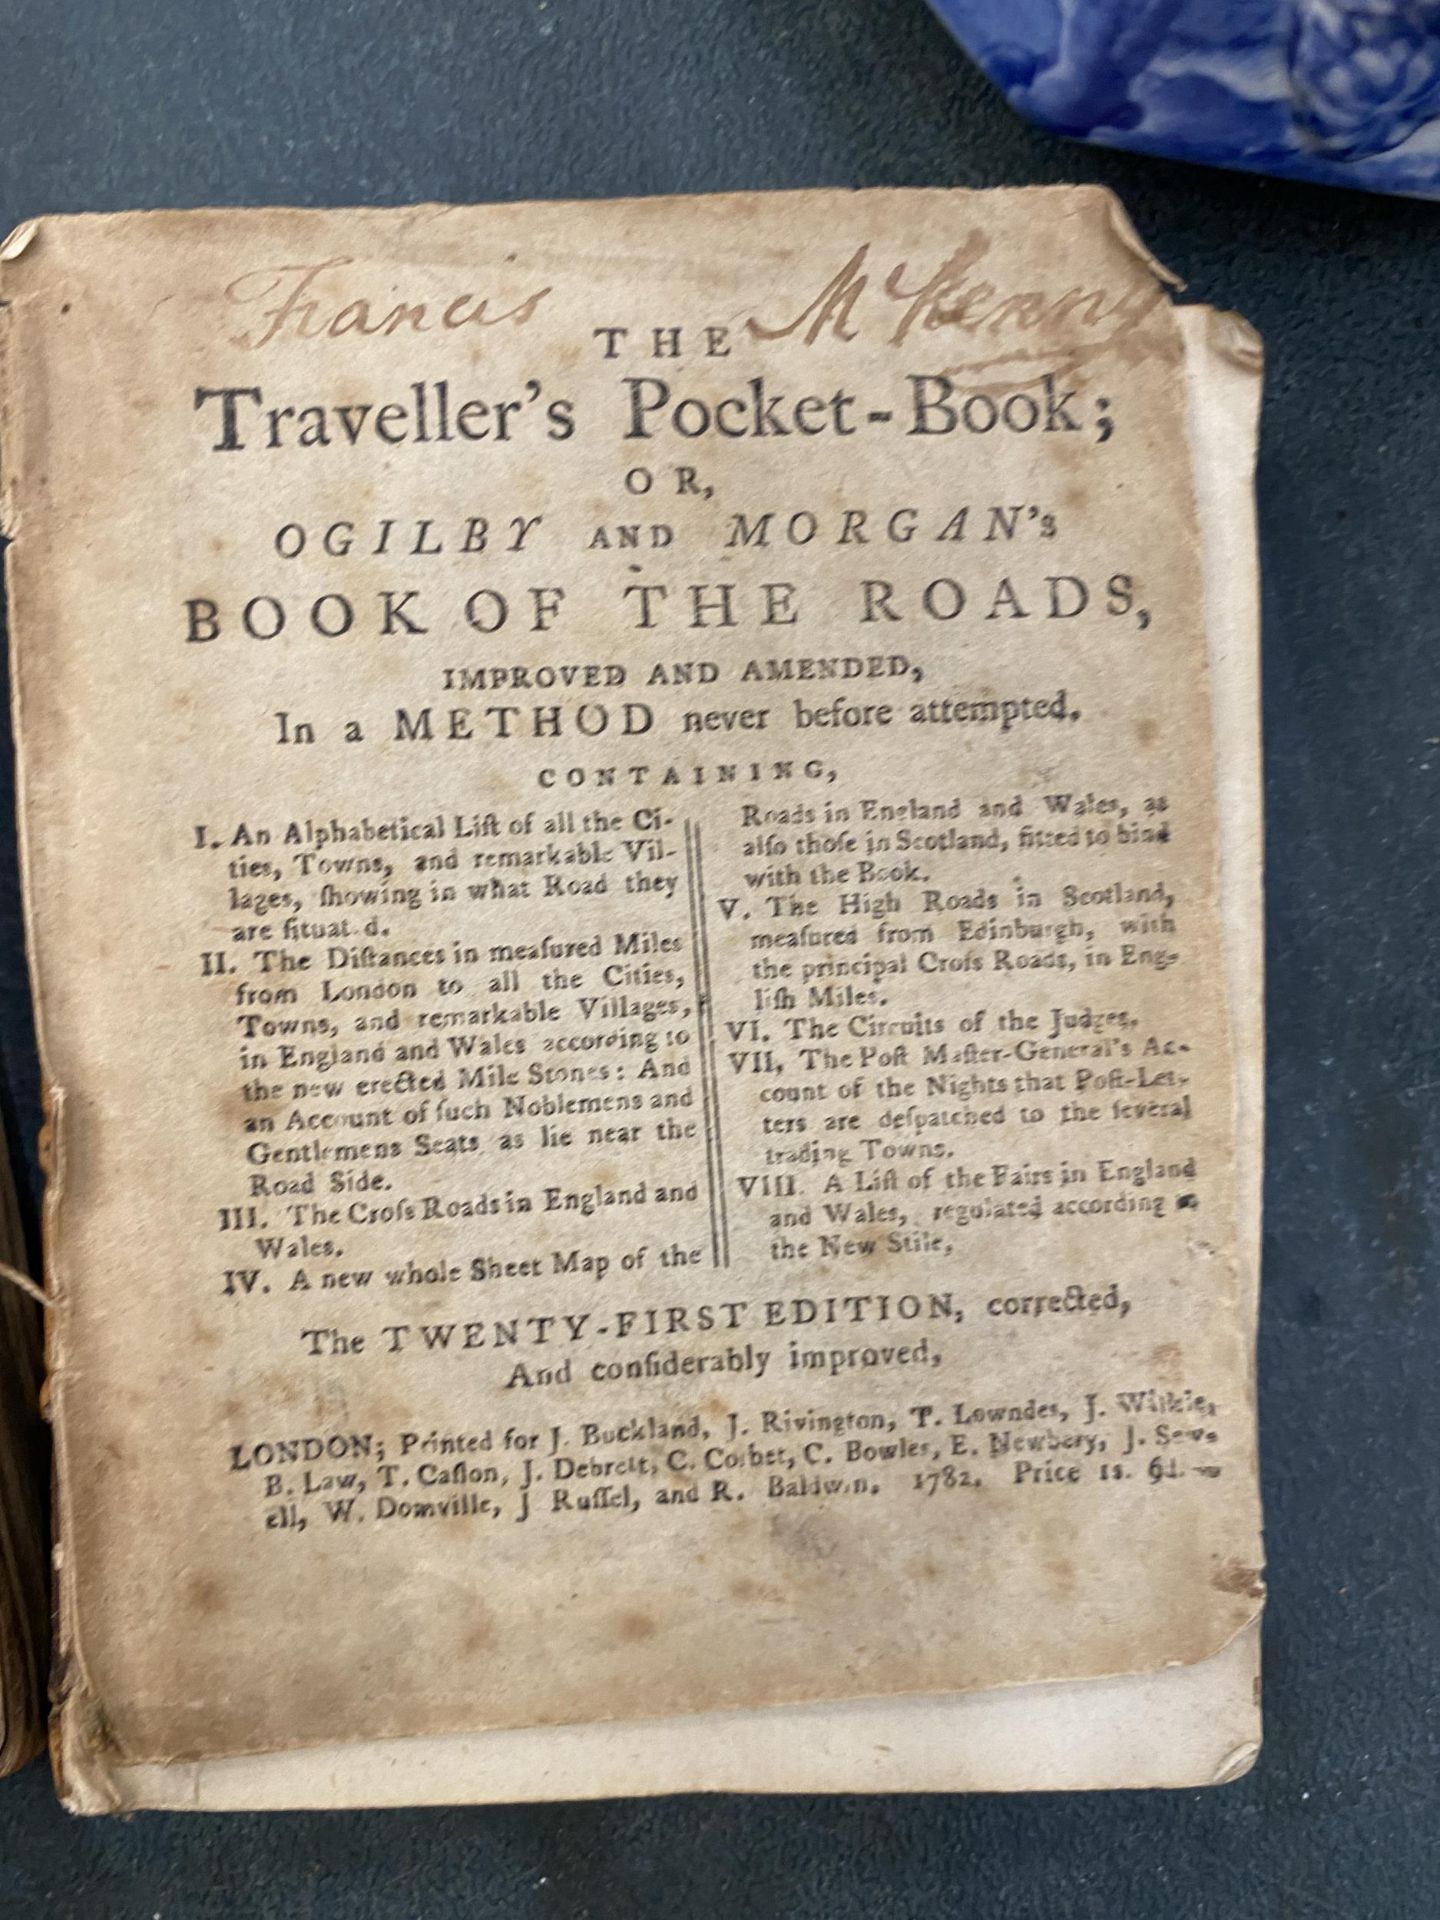 THREE ANTIQUARIAN TRAVEL BOOKS OF ROADS INCLUDING 'THE TRAVELLER'S POCKET BOOK' BY OGILBY AND - Image 2 of 2